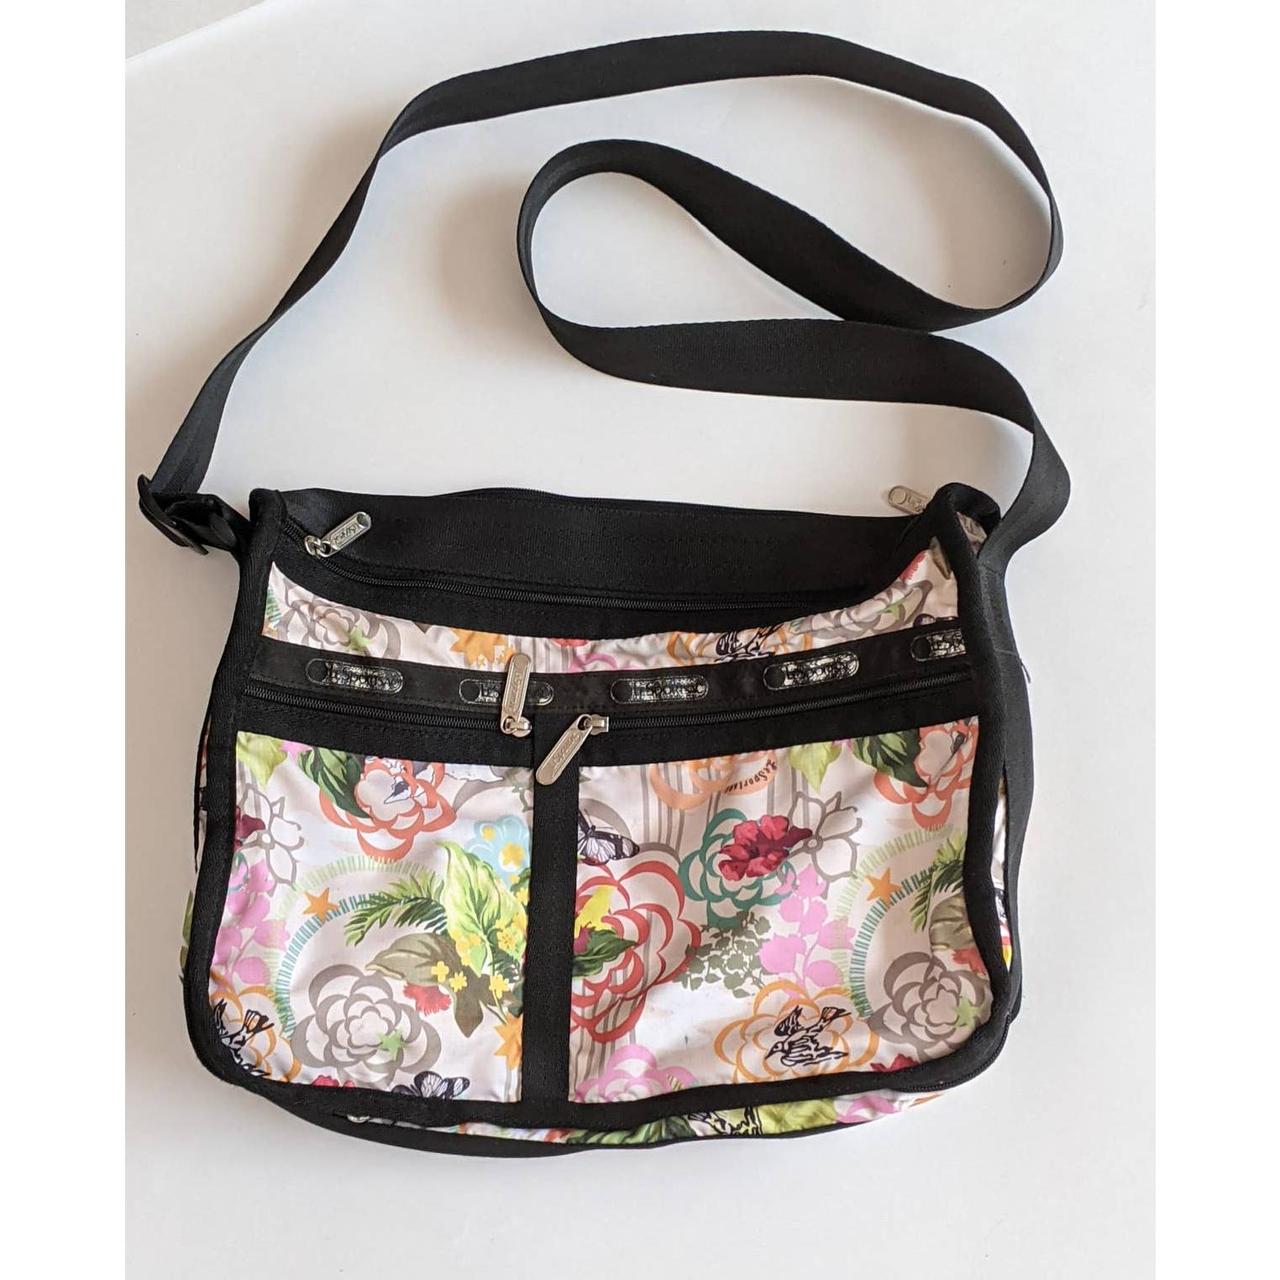 Lesportsac Deluxe Everyday Bag